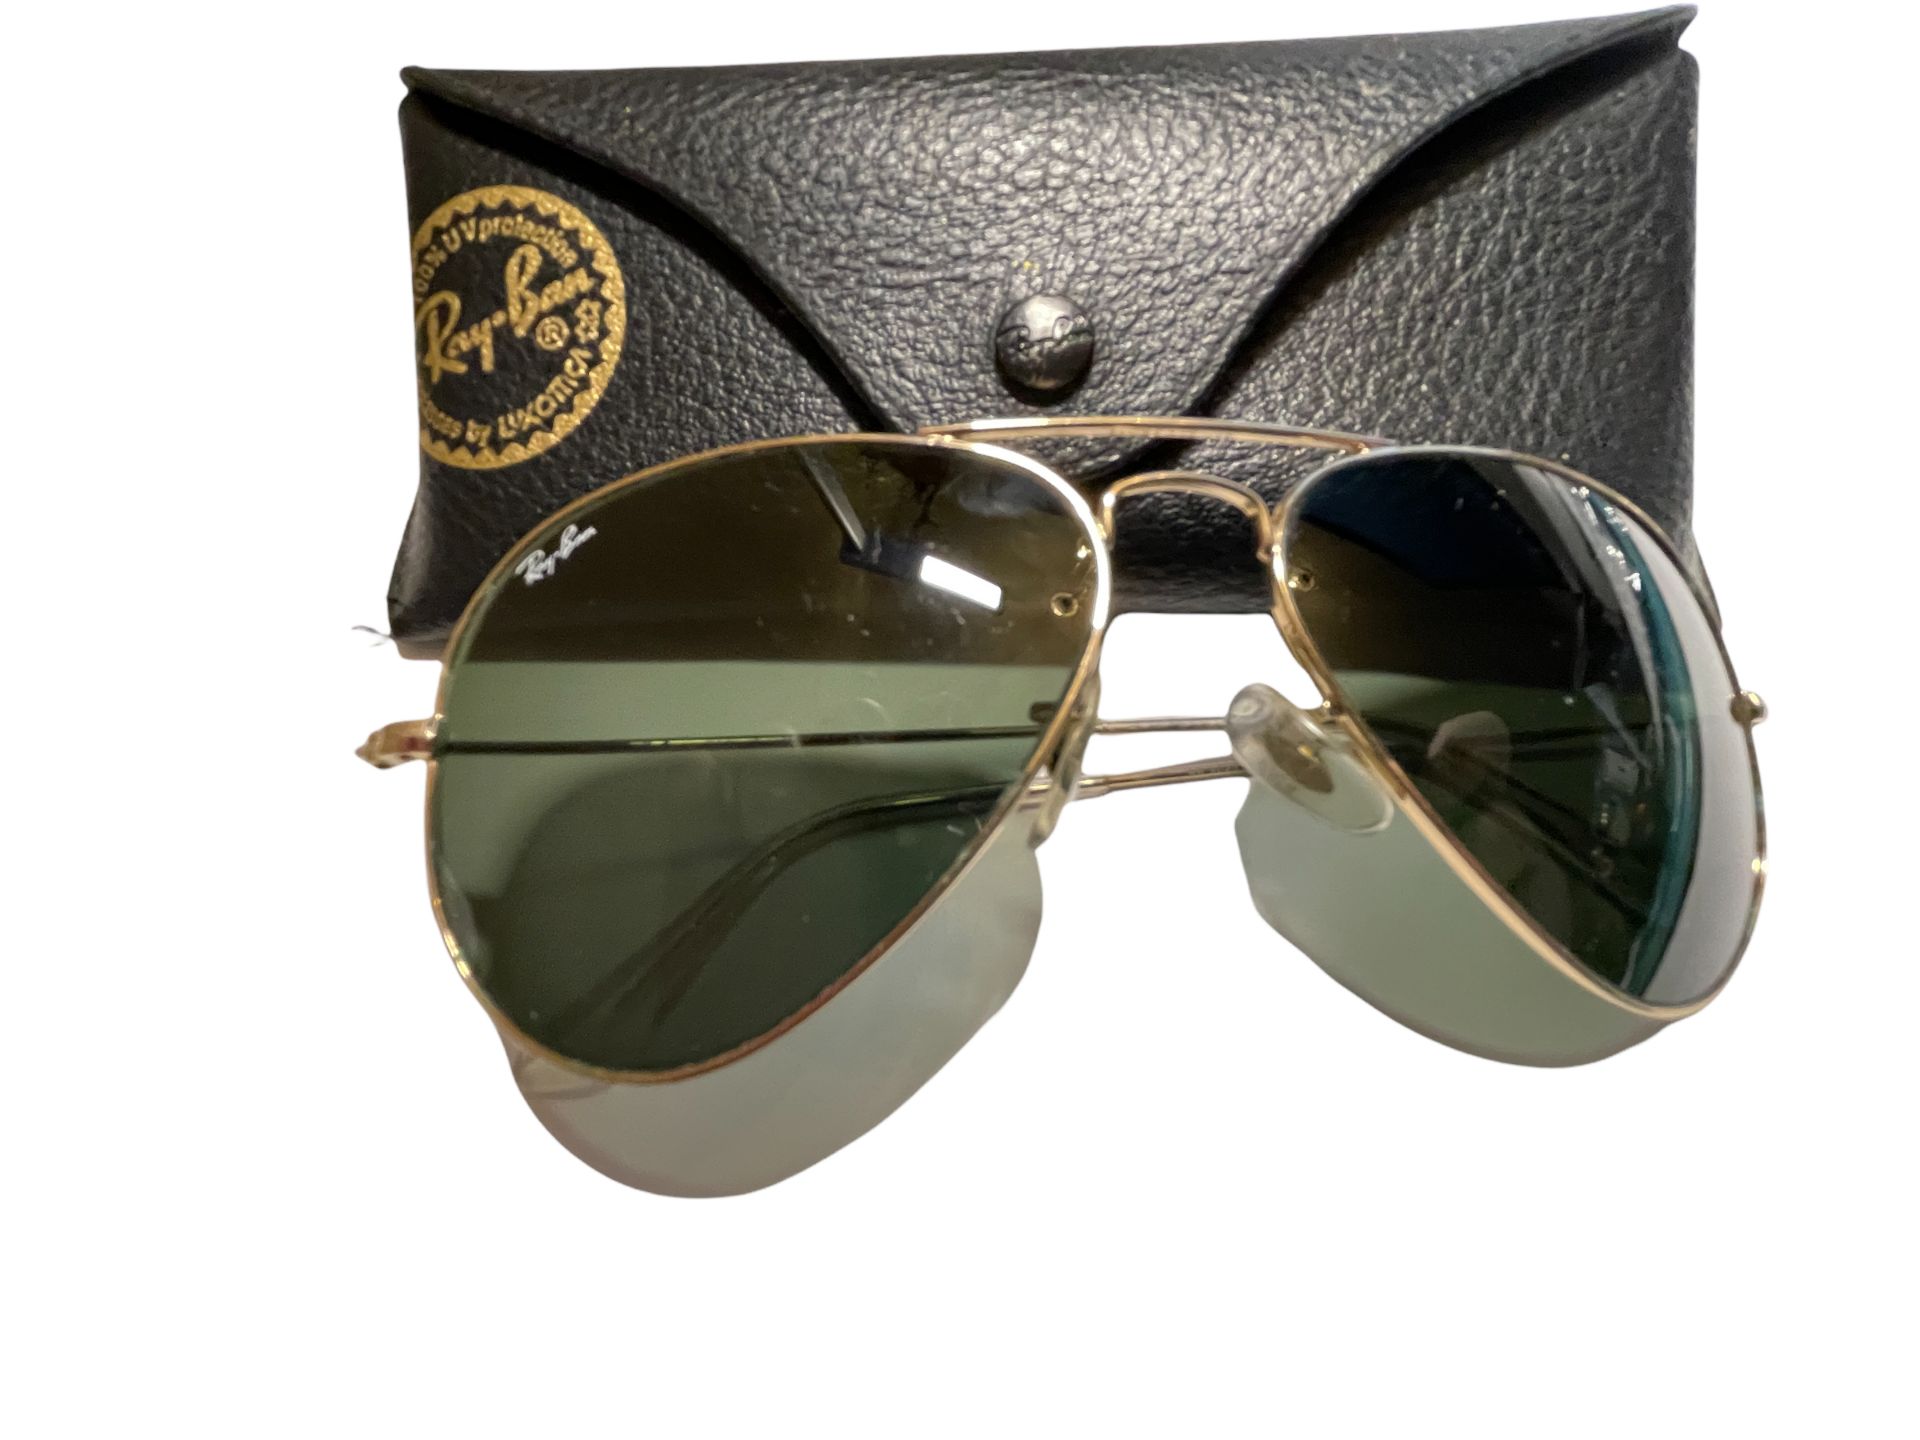 Lost Ray Ban Aviator Sunglasses with case on our private jet charter. - Image 6 of 6